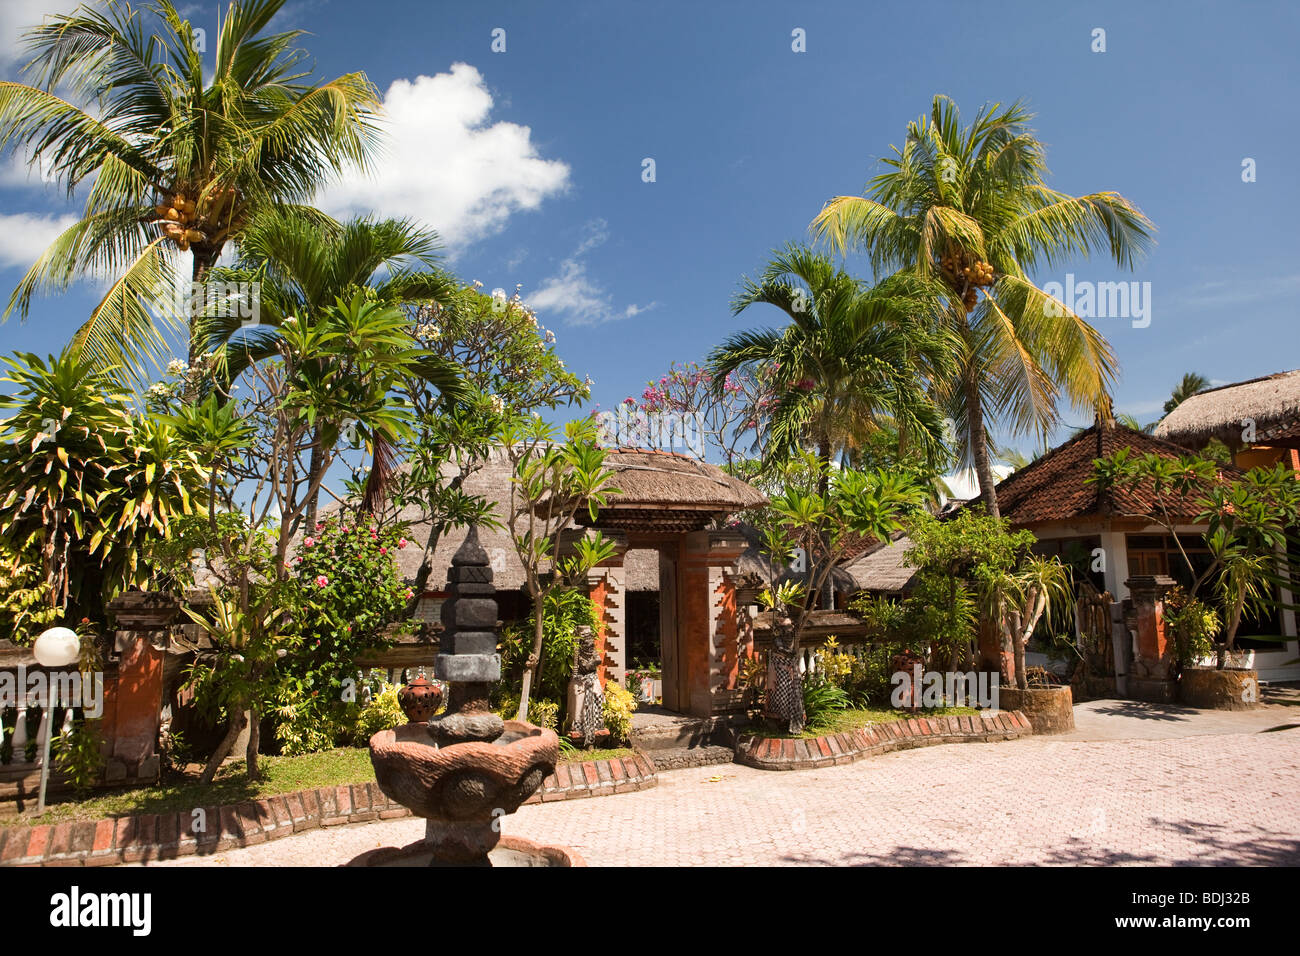 Indonesia, Bali, Candidasa, Grand Natia Hotel entrance gateway, built in traditional Balinese architectural style Stock Photo